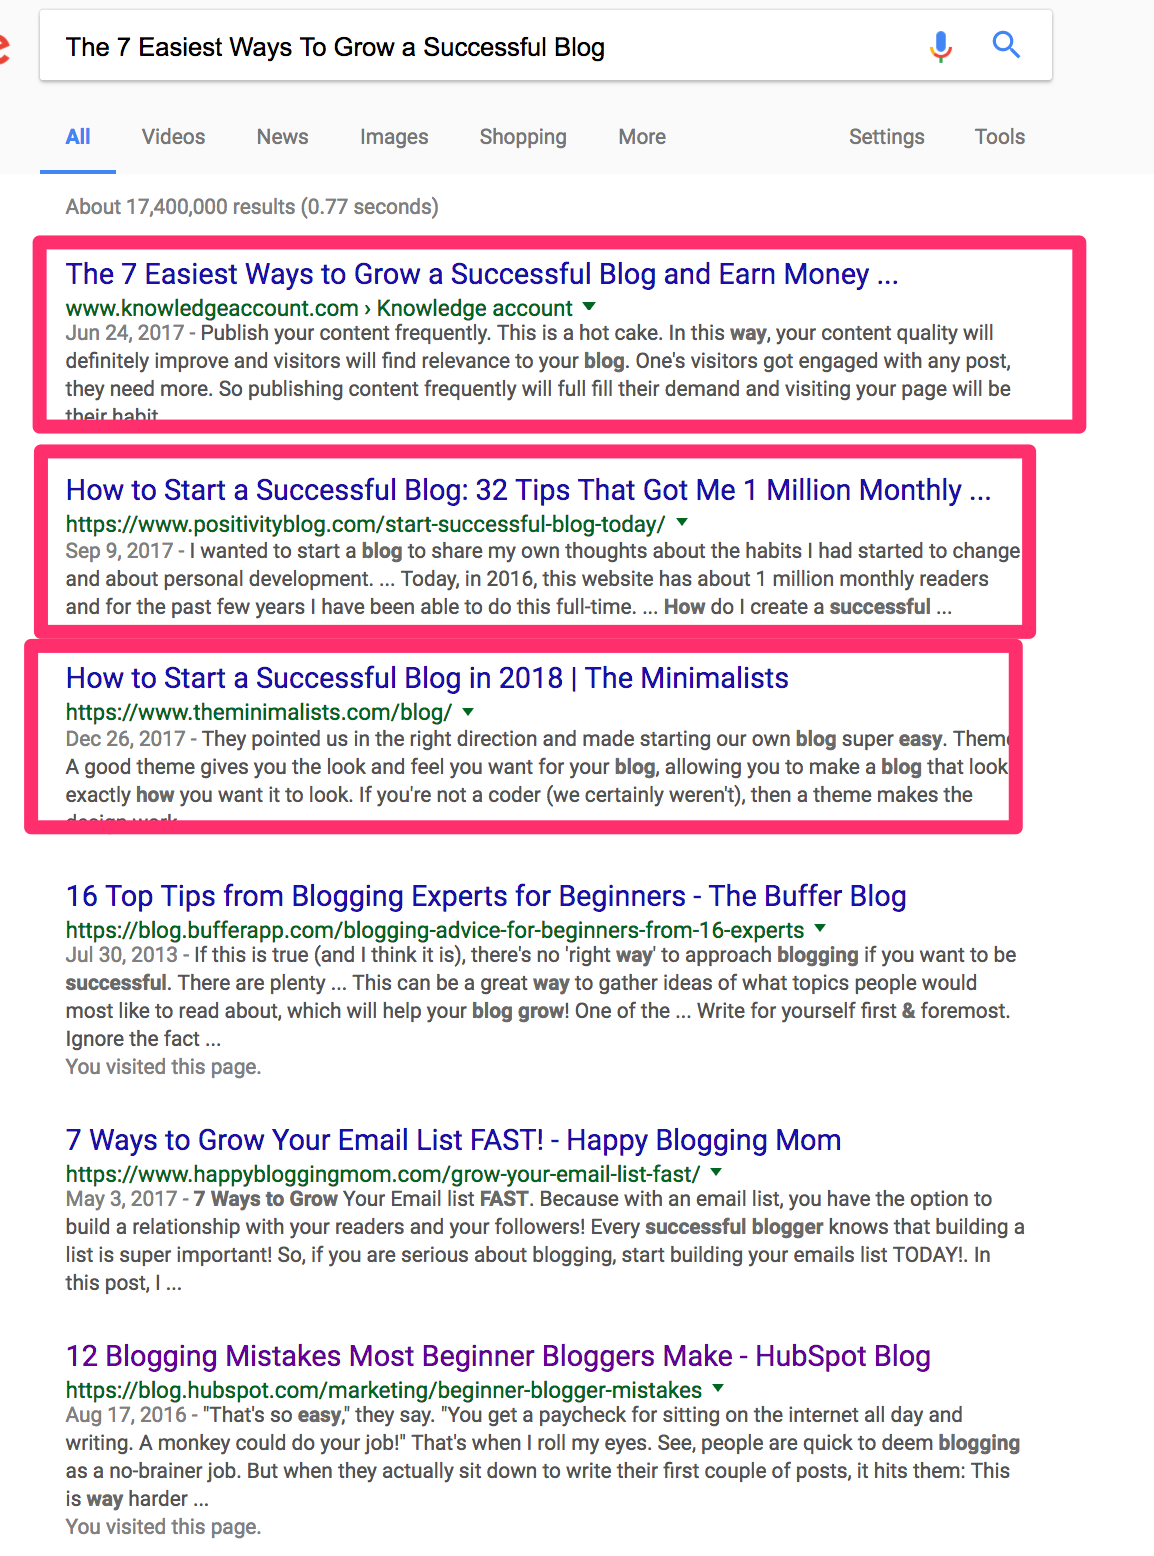 The 7 Easiest Ways To Grow a Successful Blog Google Search